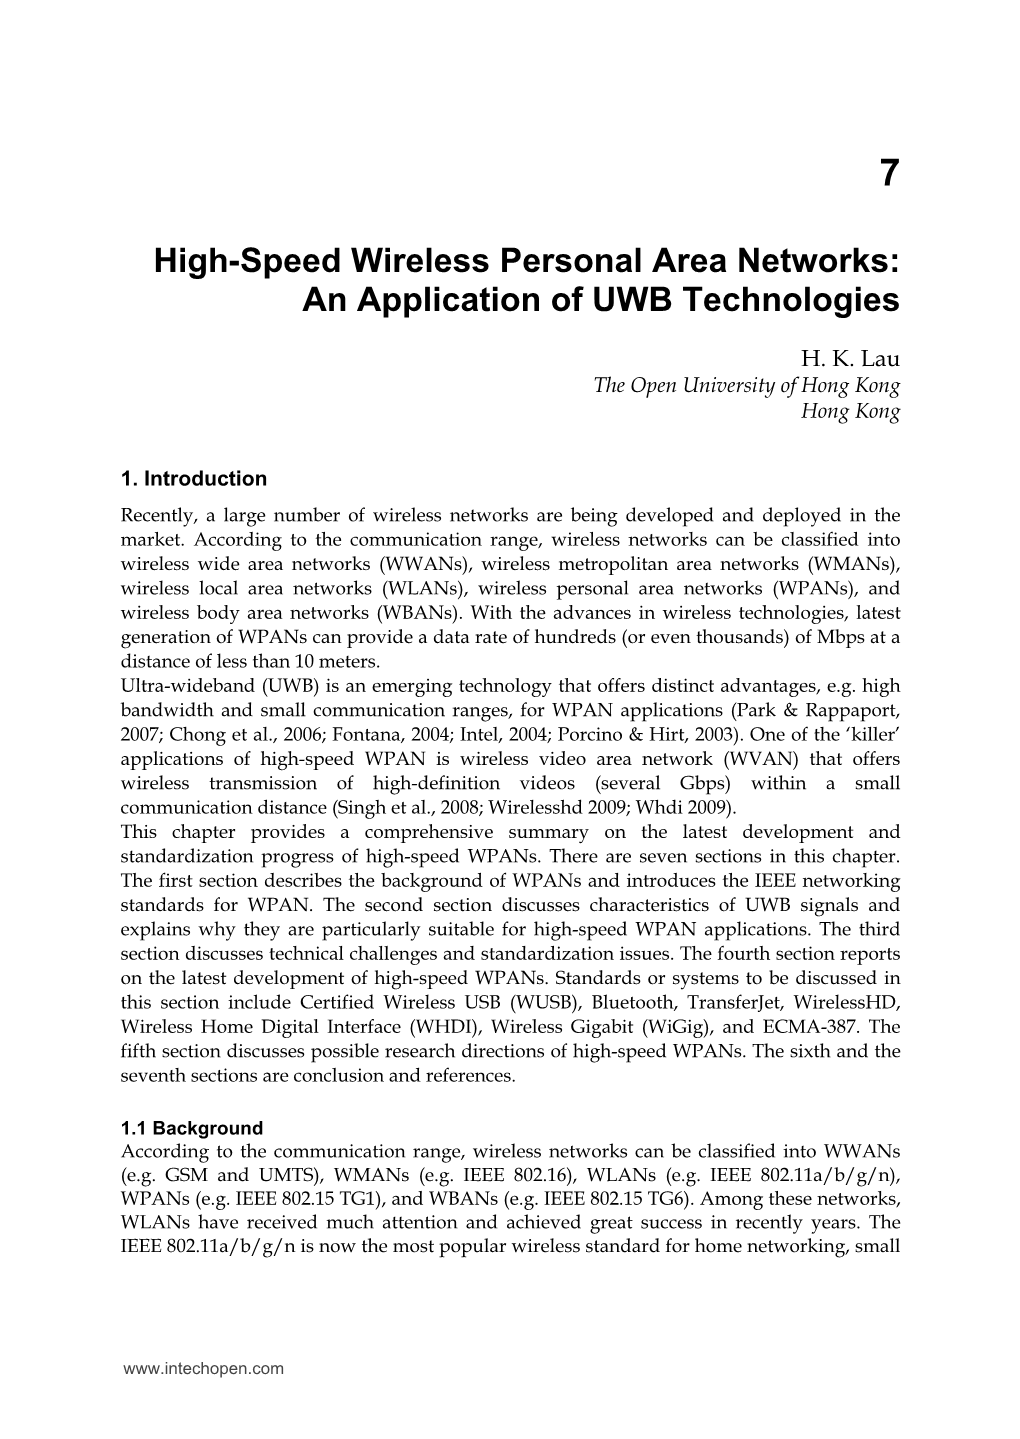 High-Speed Wireless Personal Area Networks: an Application of UWB Technologies